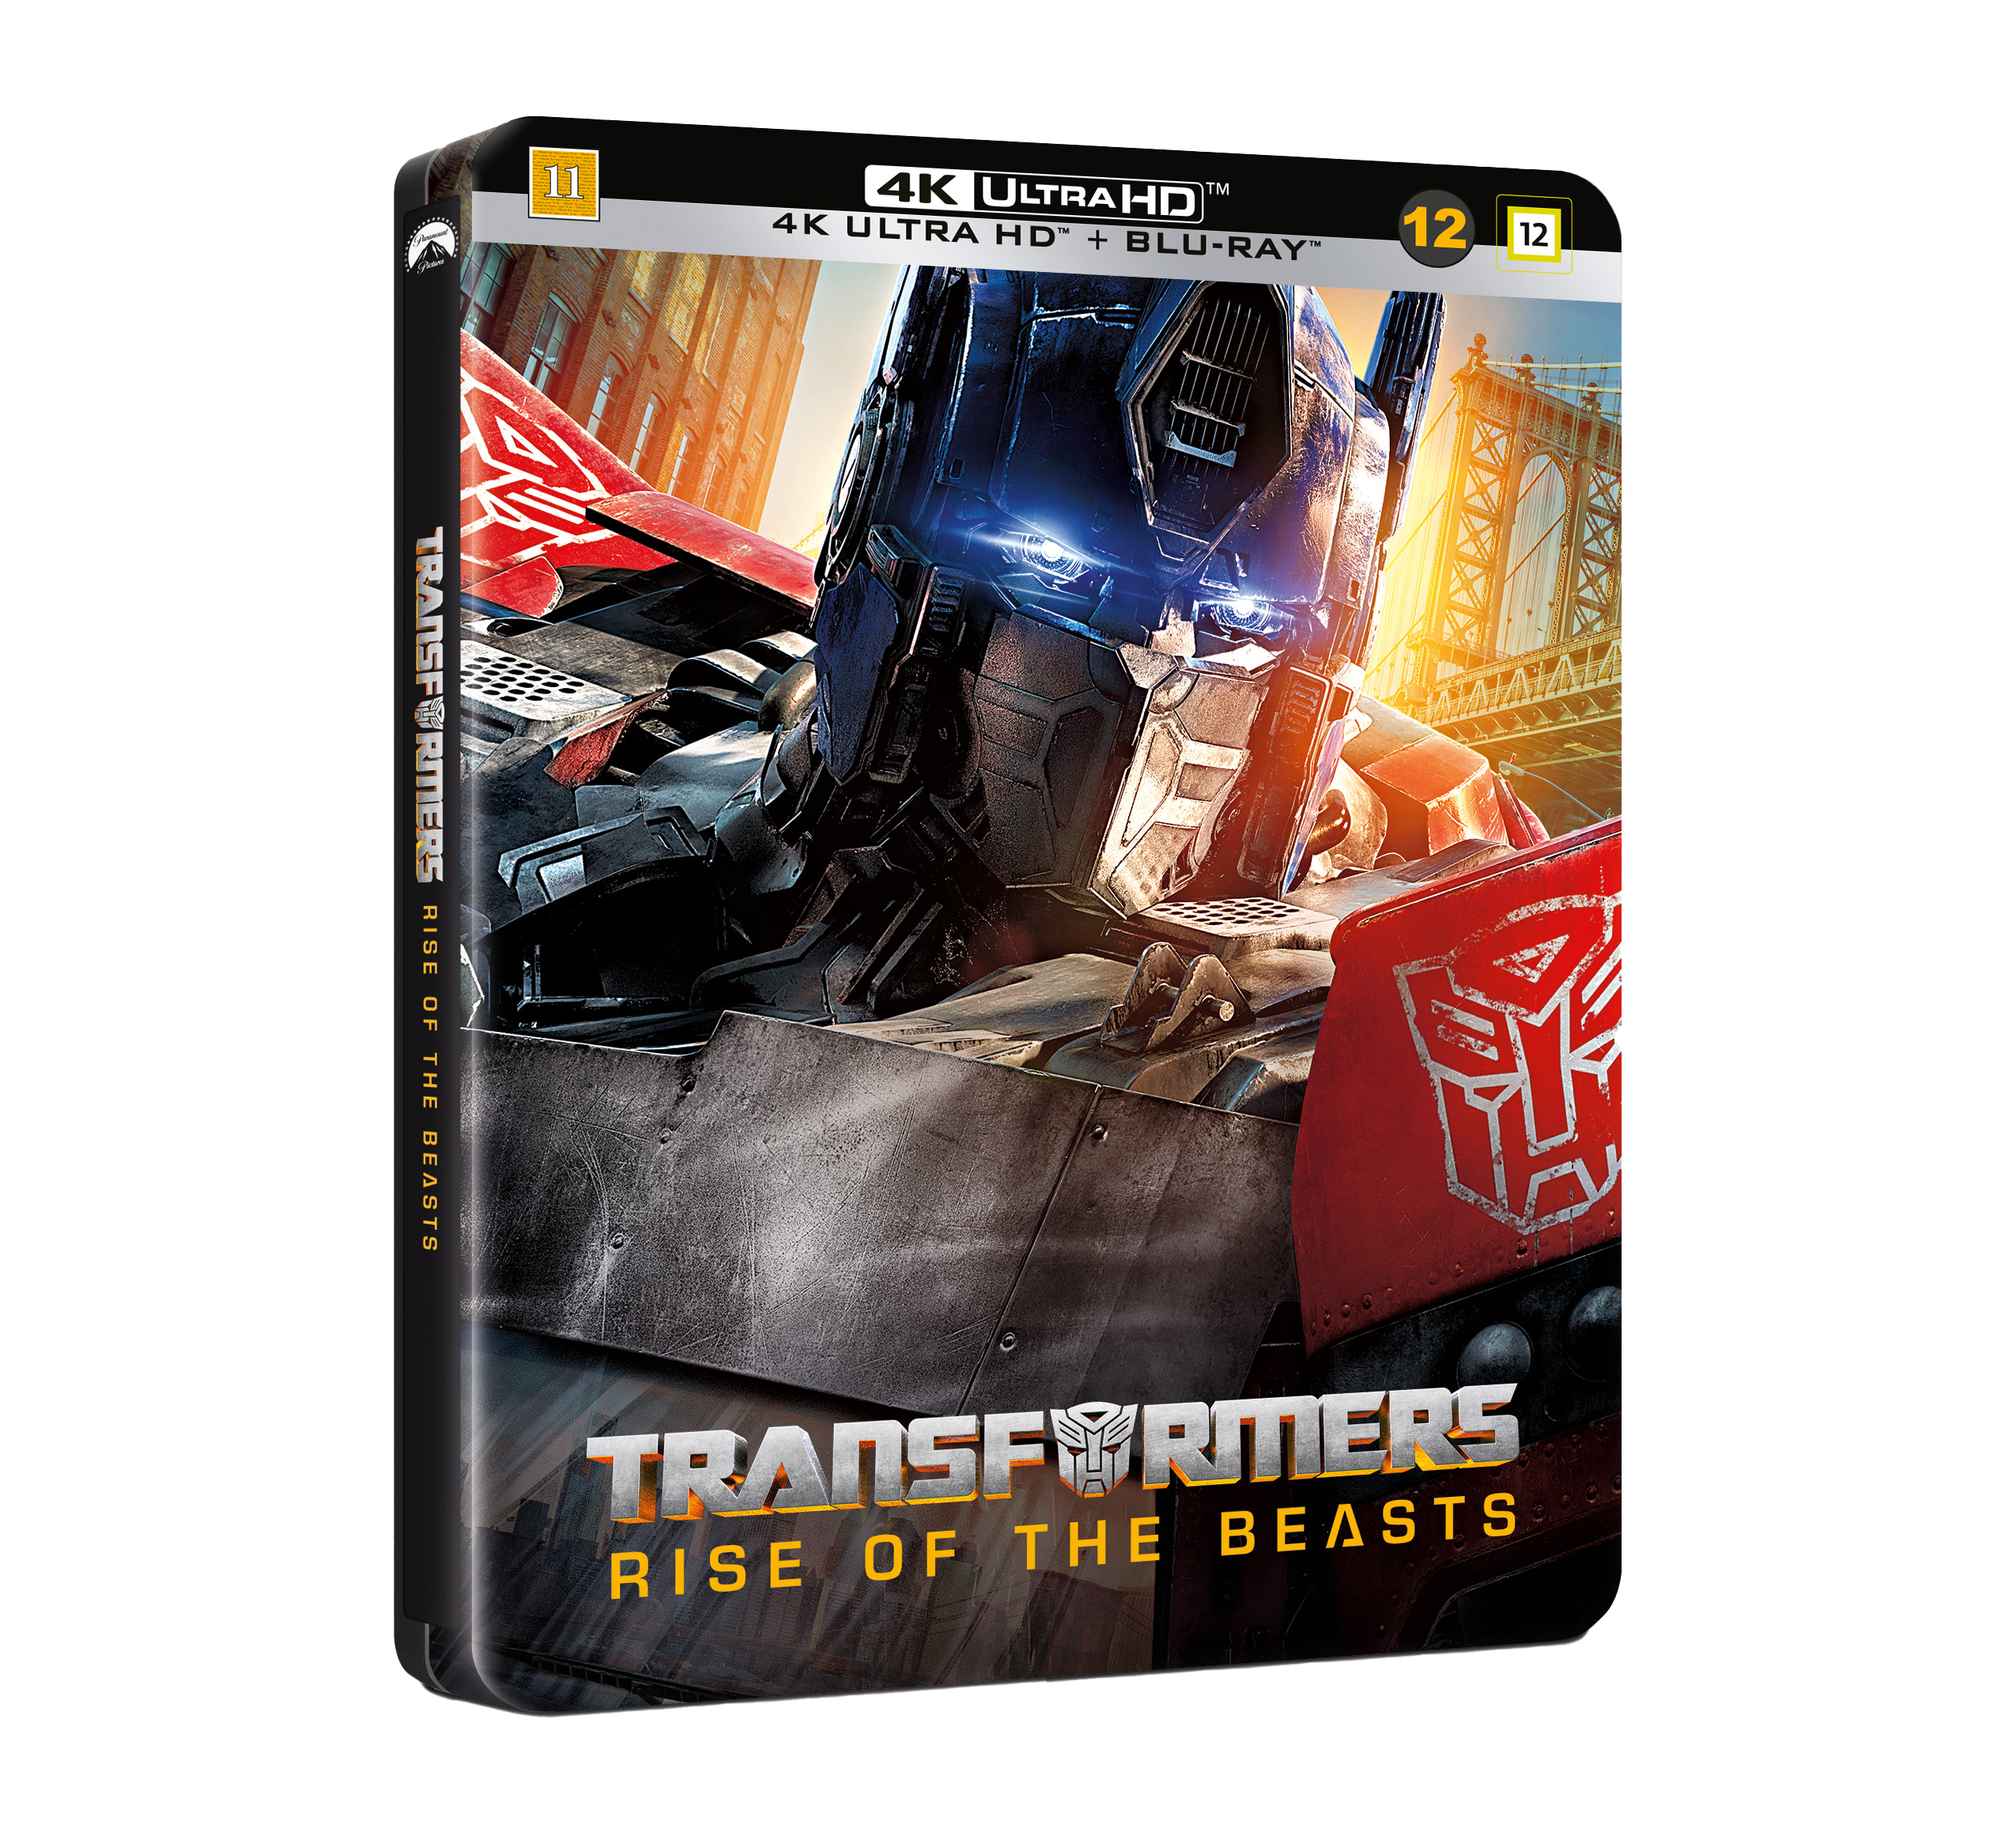 Buy Transformers Rise of the Beasts 4K BluRay Steelbook Free